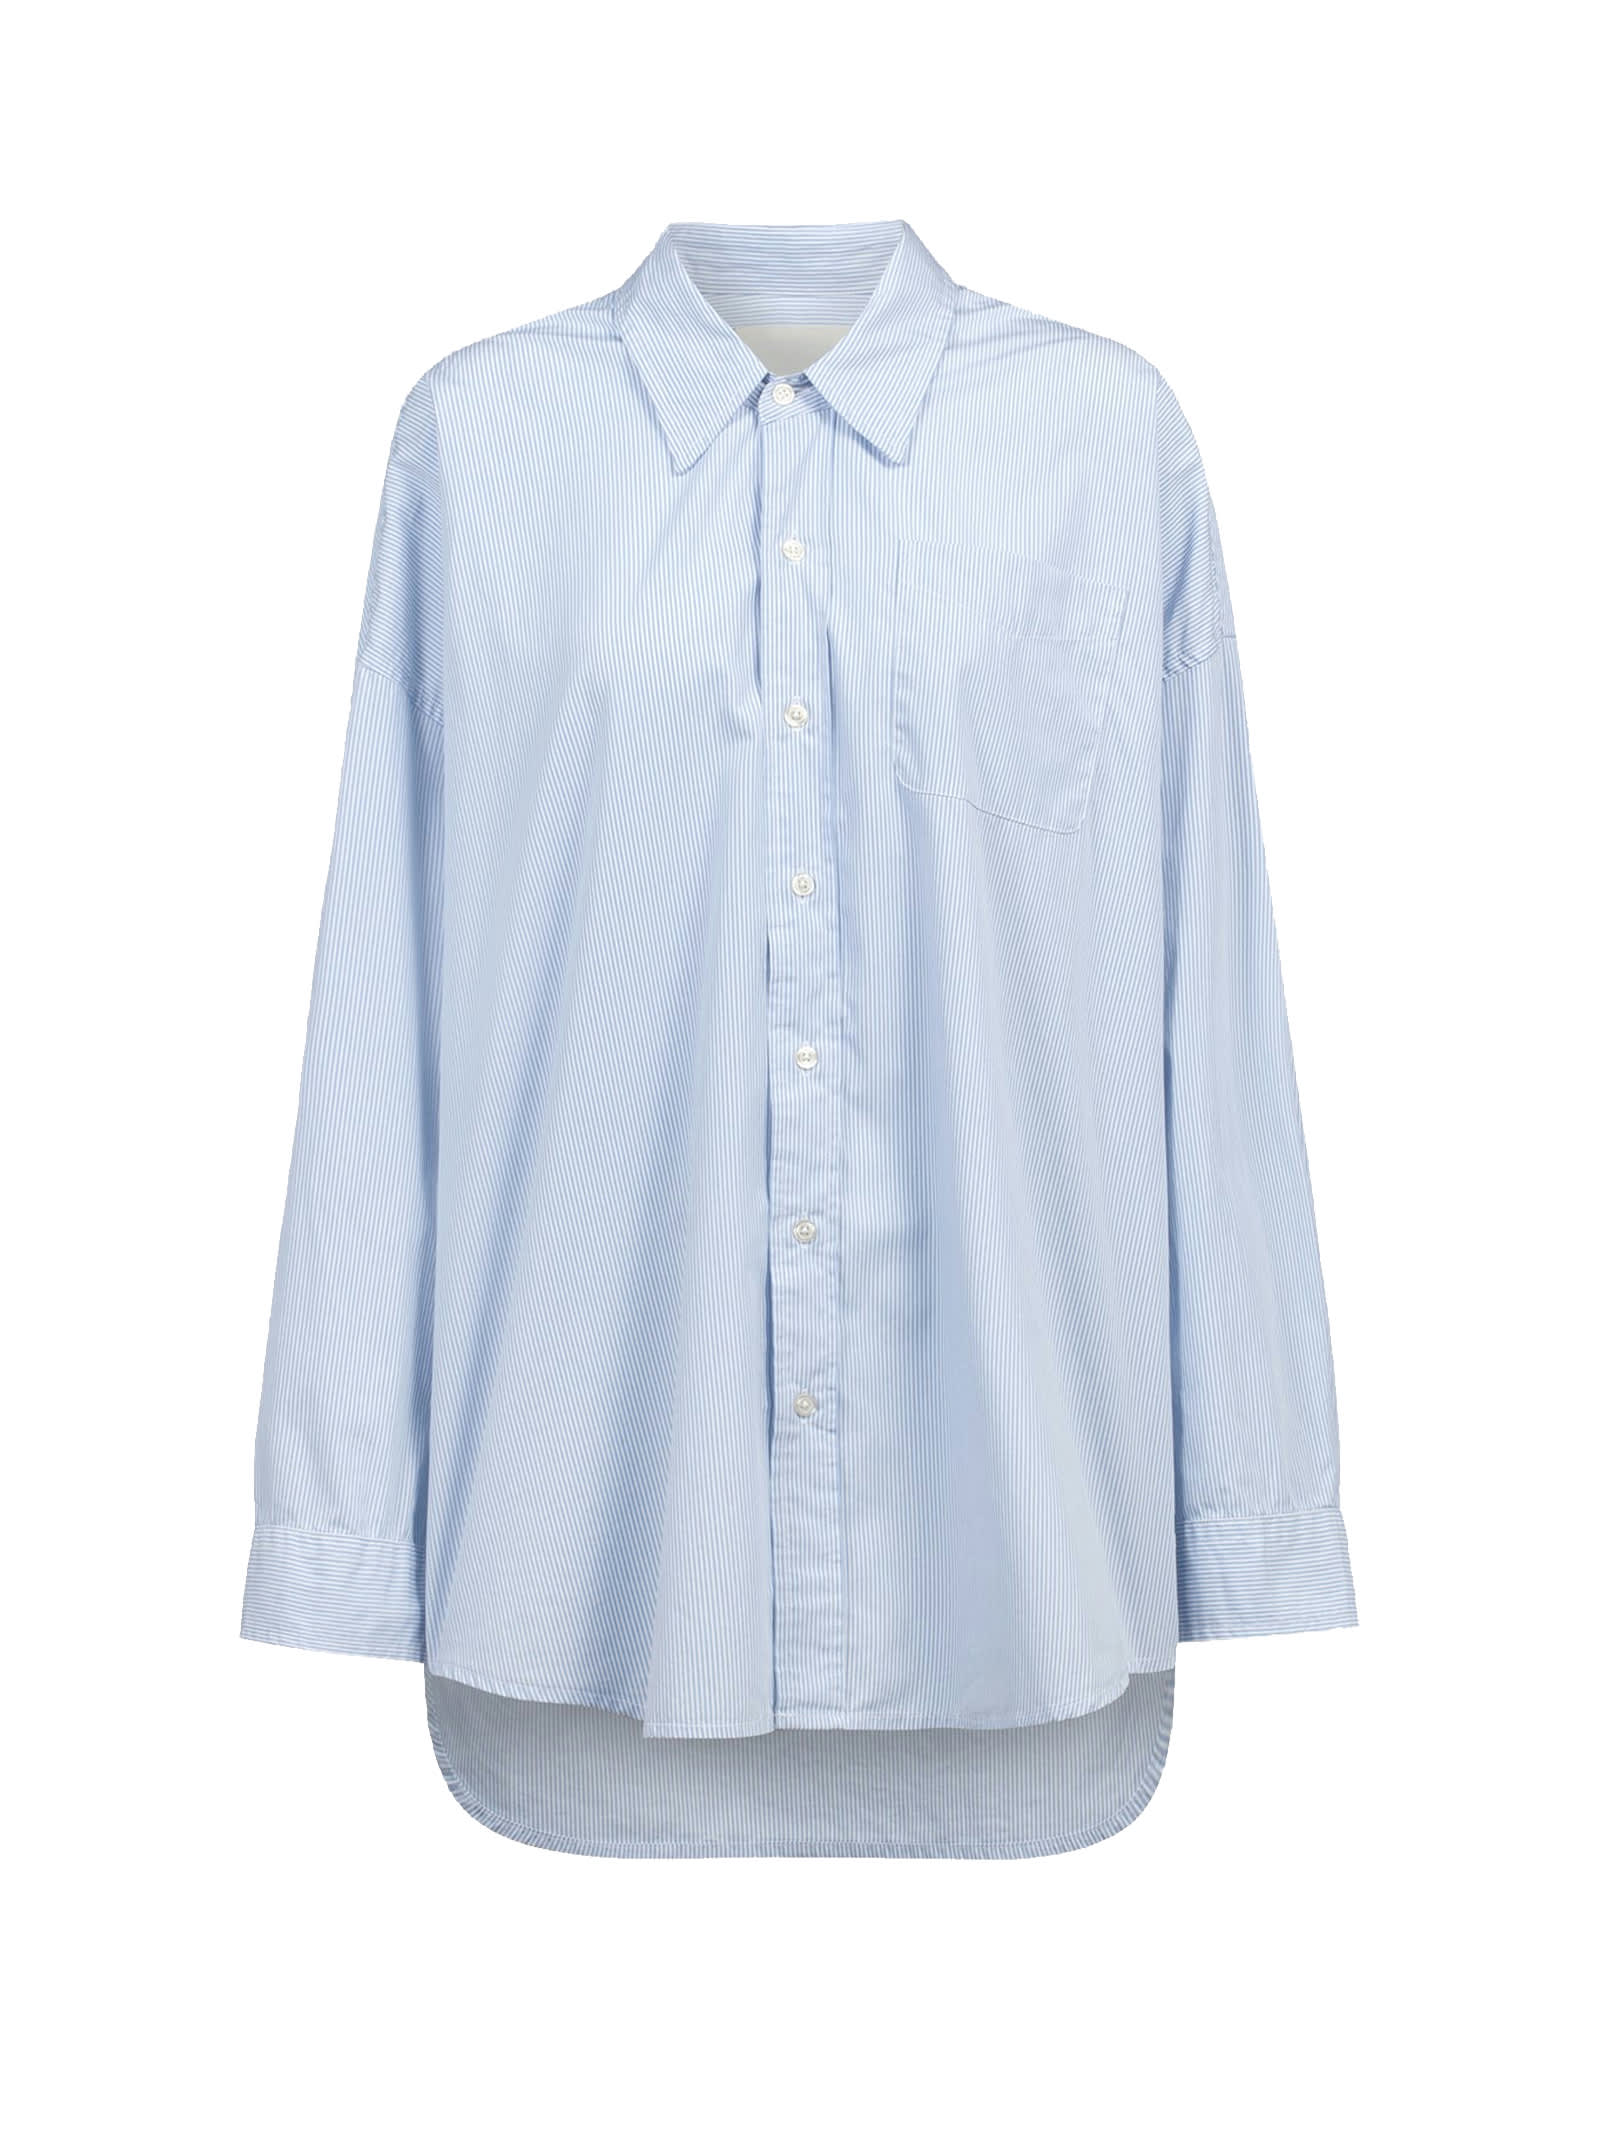 R13 OVER STRIPED OXFORD SHIRT